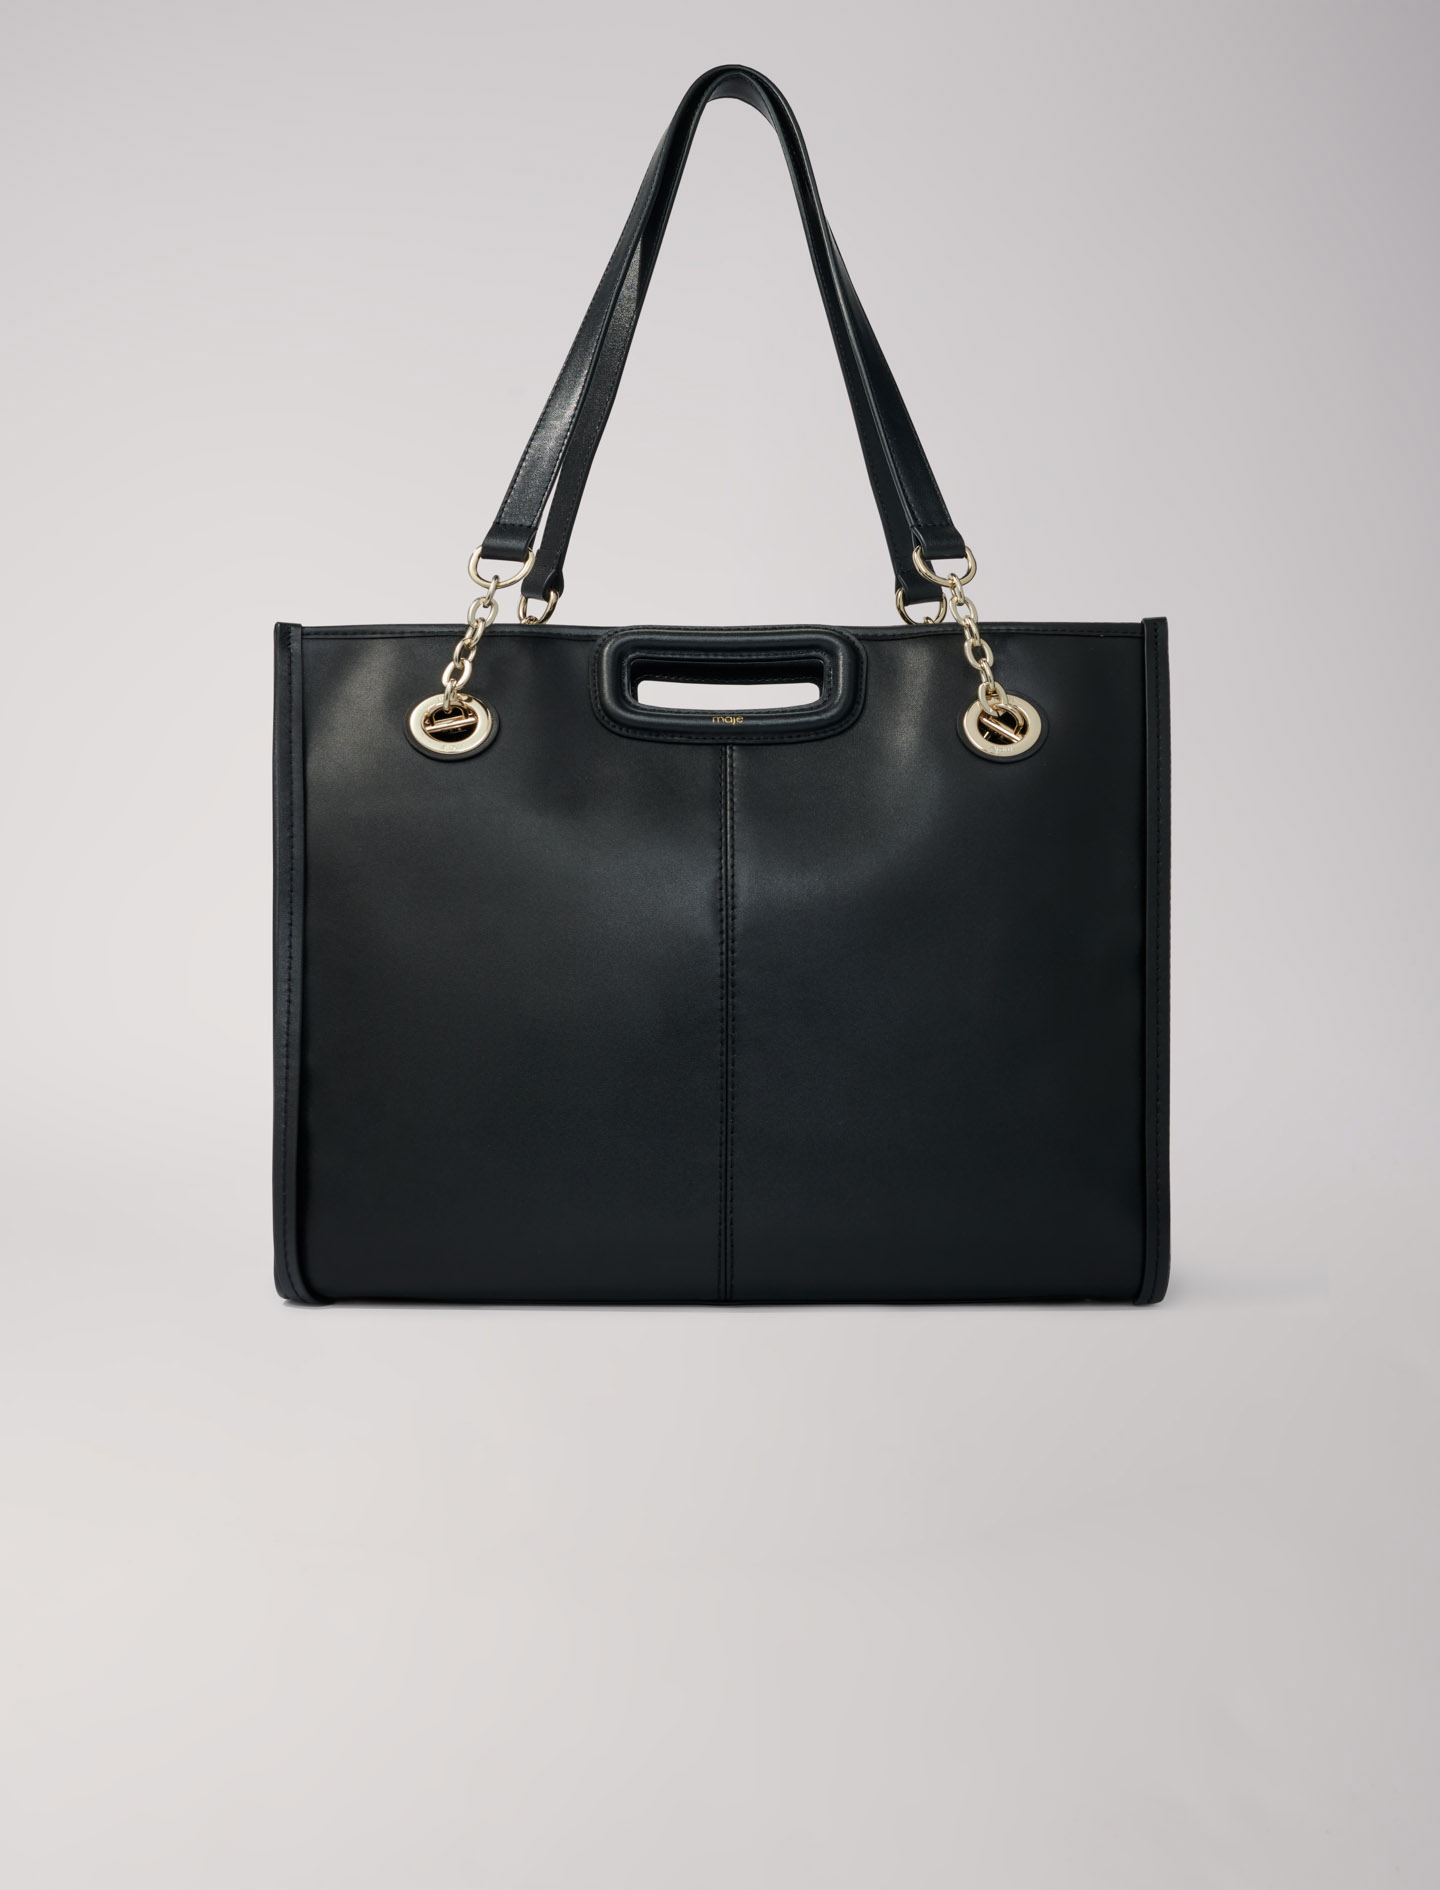 Maje Woman's polyester Eyelet: Leather tote bag for Fall/Winter, in color Black / Black